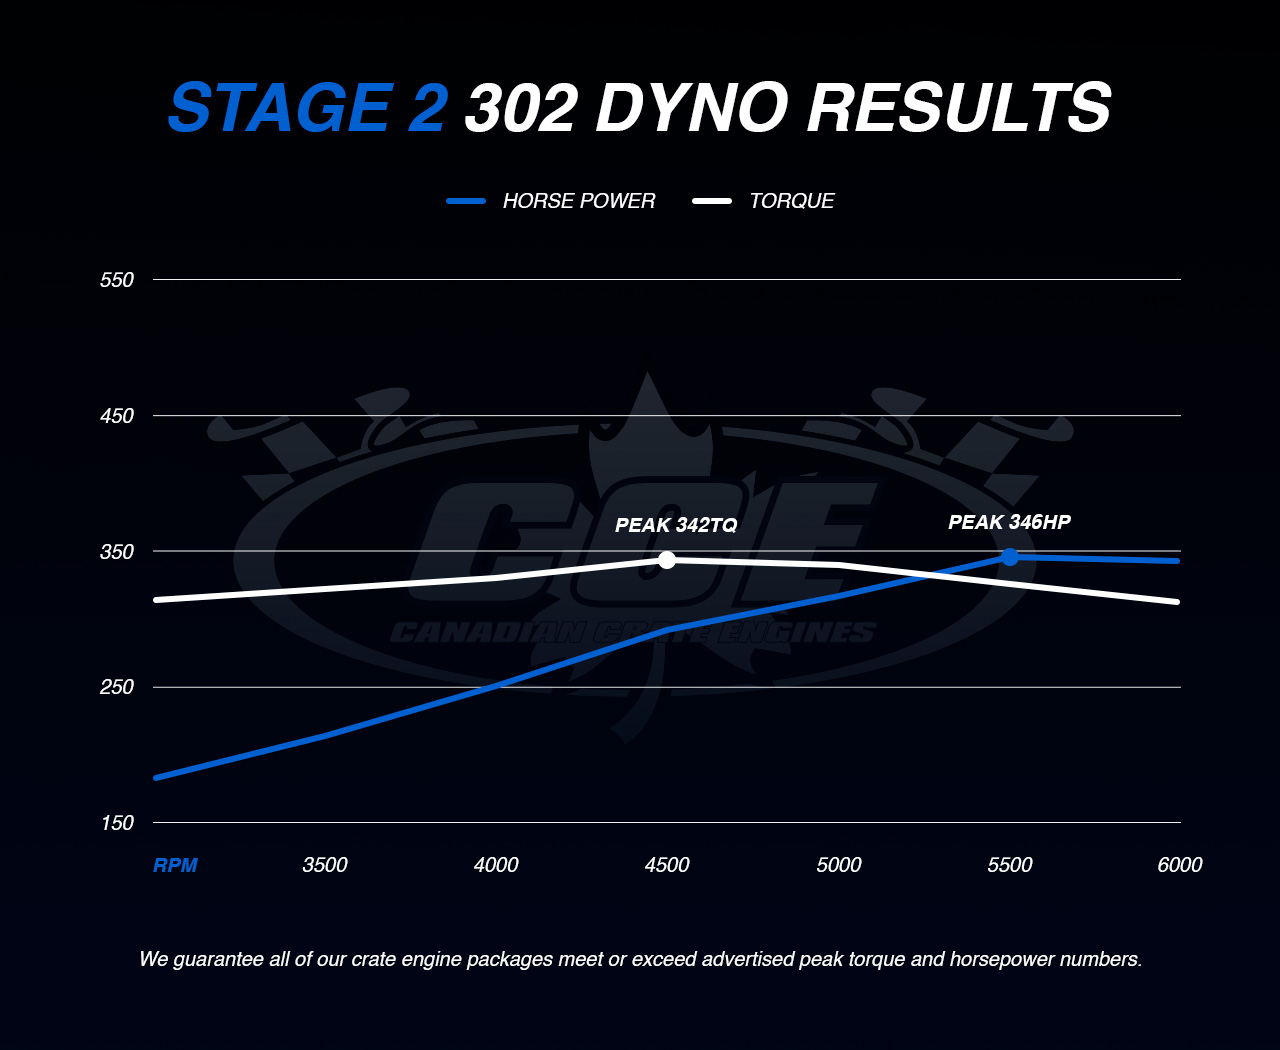 Dyno Graph Results for Ford Stage 2 showing peak torque of 342TQ and peak horsepower of 346HP